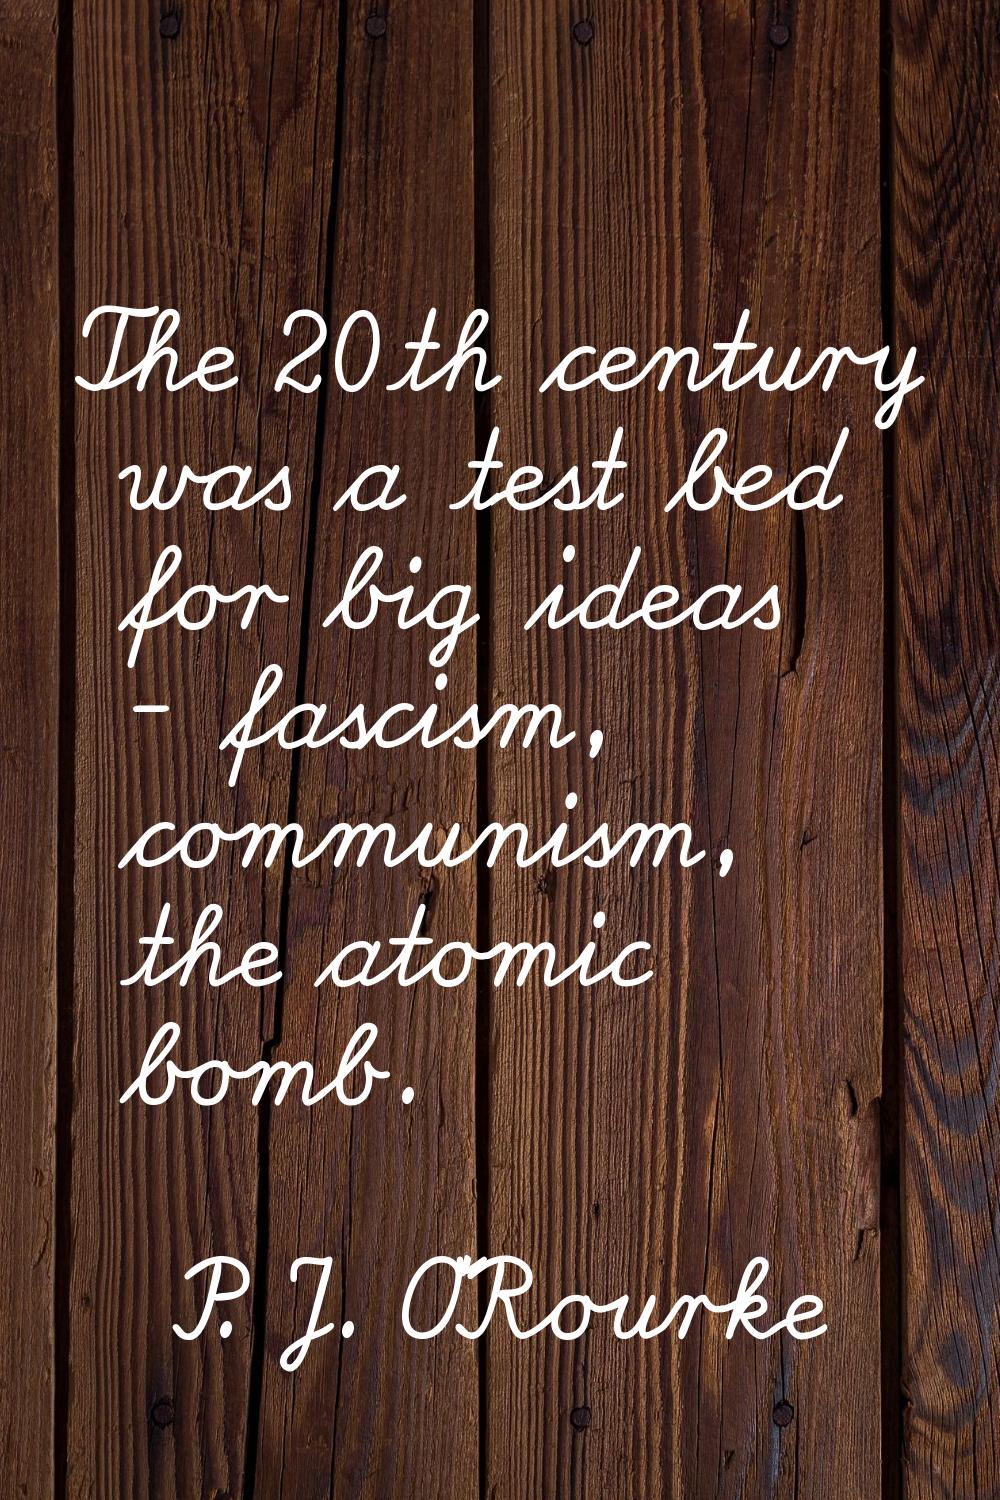 The 20th century was a test bed for big ideas - fascism, communism, the atomic bomb.